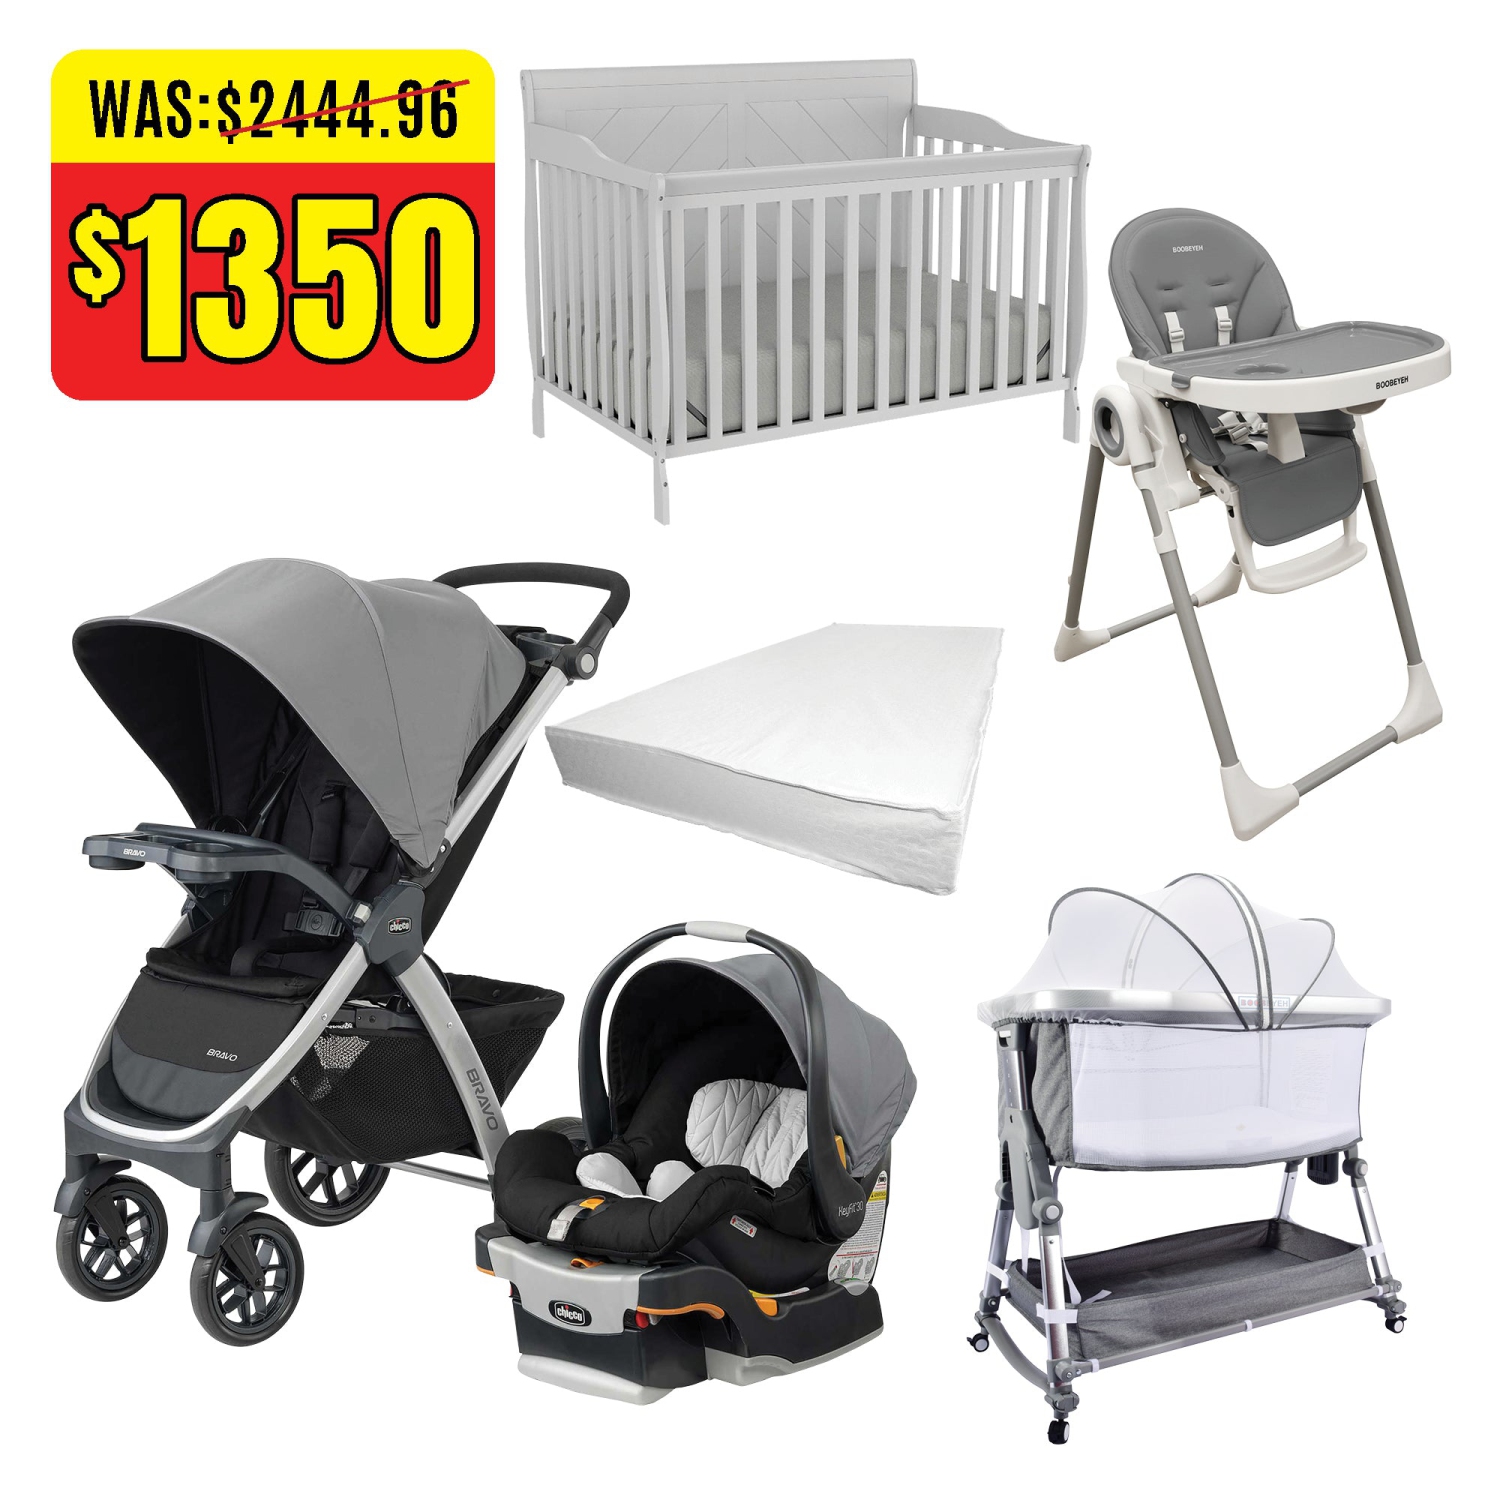 Save yourself time and money with our baby starter kit 125.